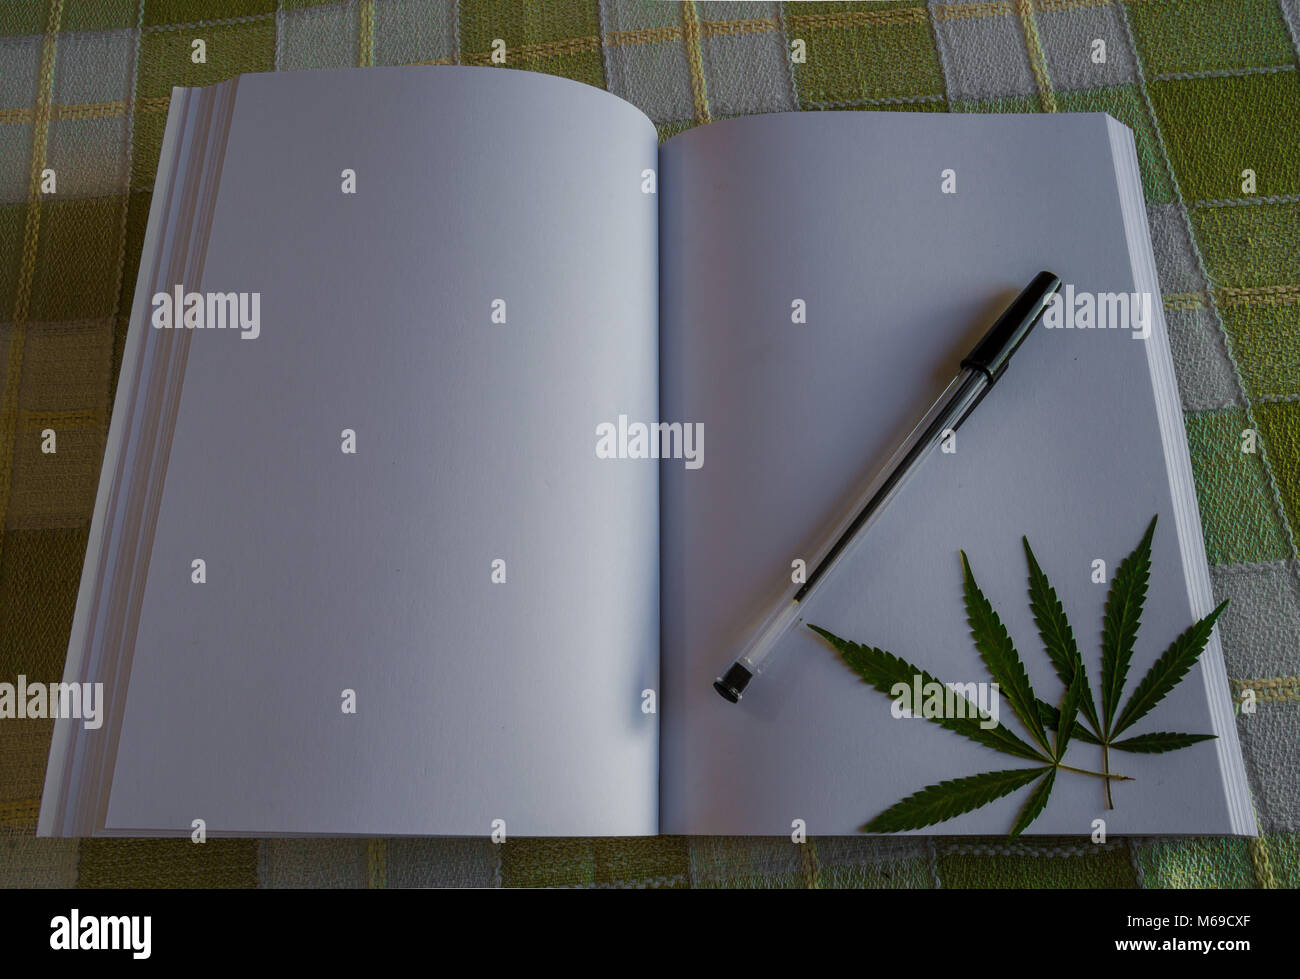 Notebook in blank with some green marijuana leaves and black pen. Background of a yellow checkered fabric with space to edit or add text, elements... Stock Photo